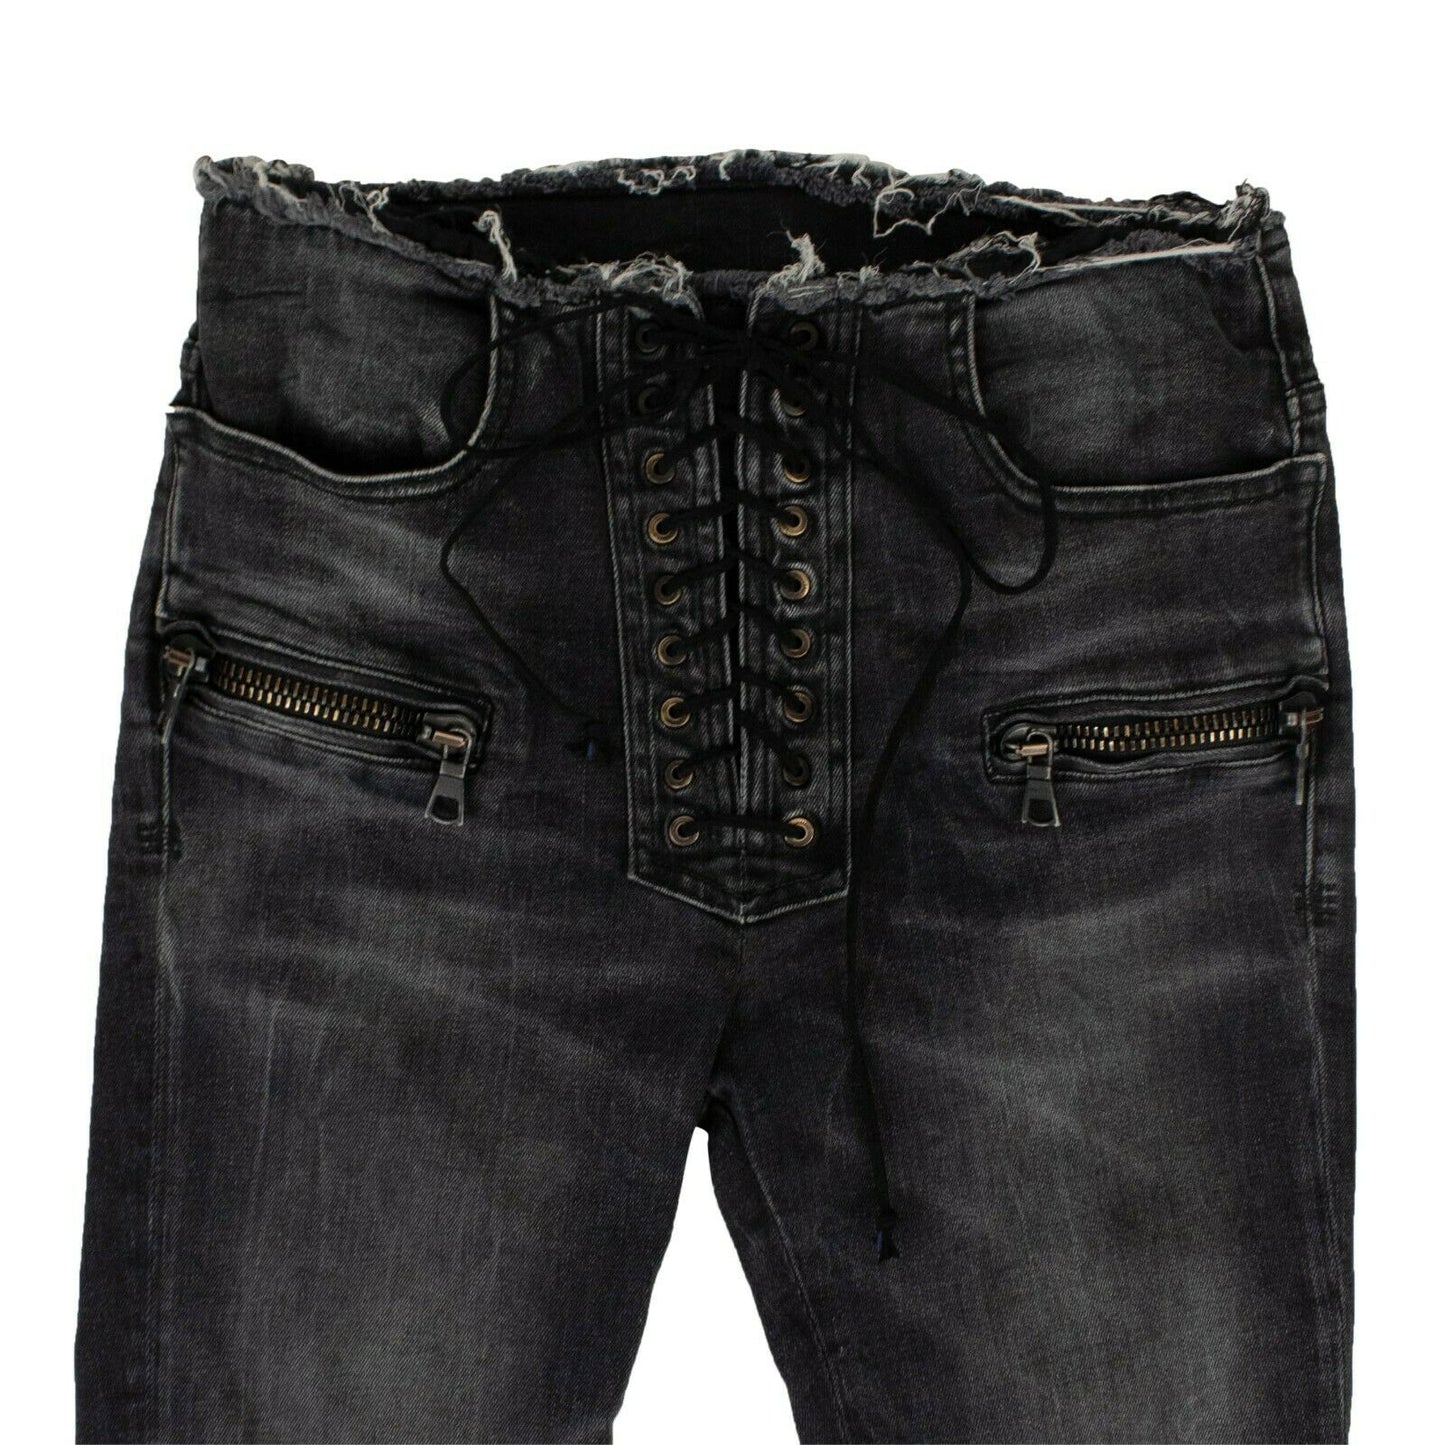 Unravel Project Dark Lace-Up Skinny Jeans - Denim